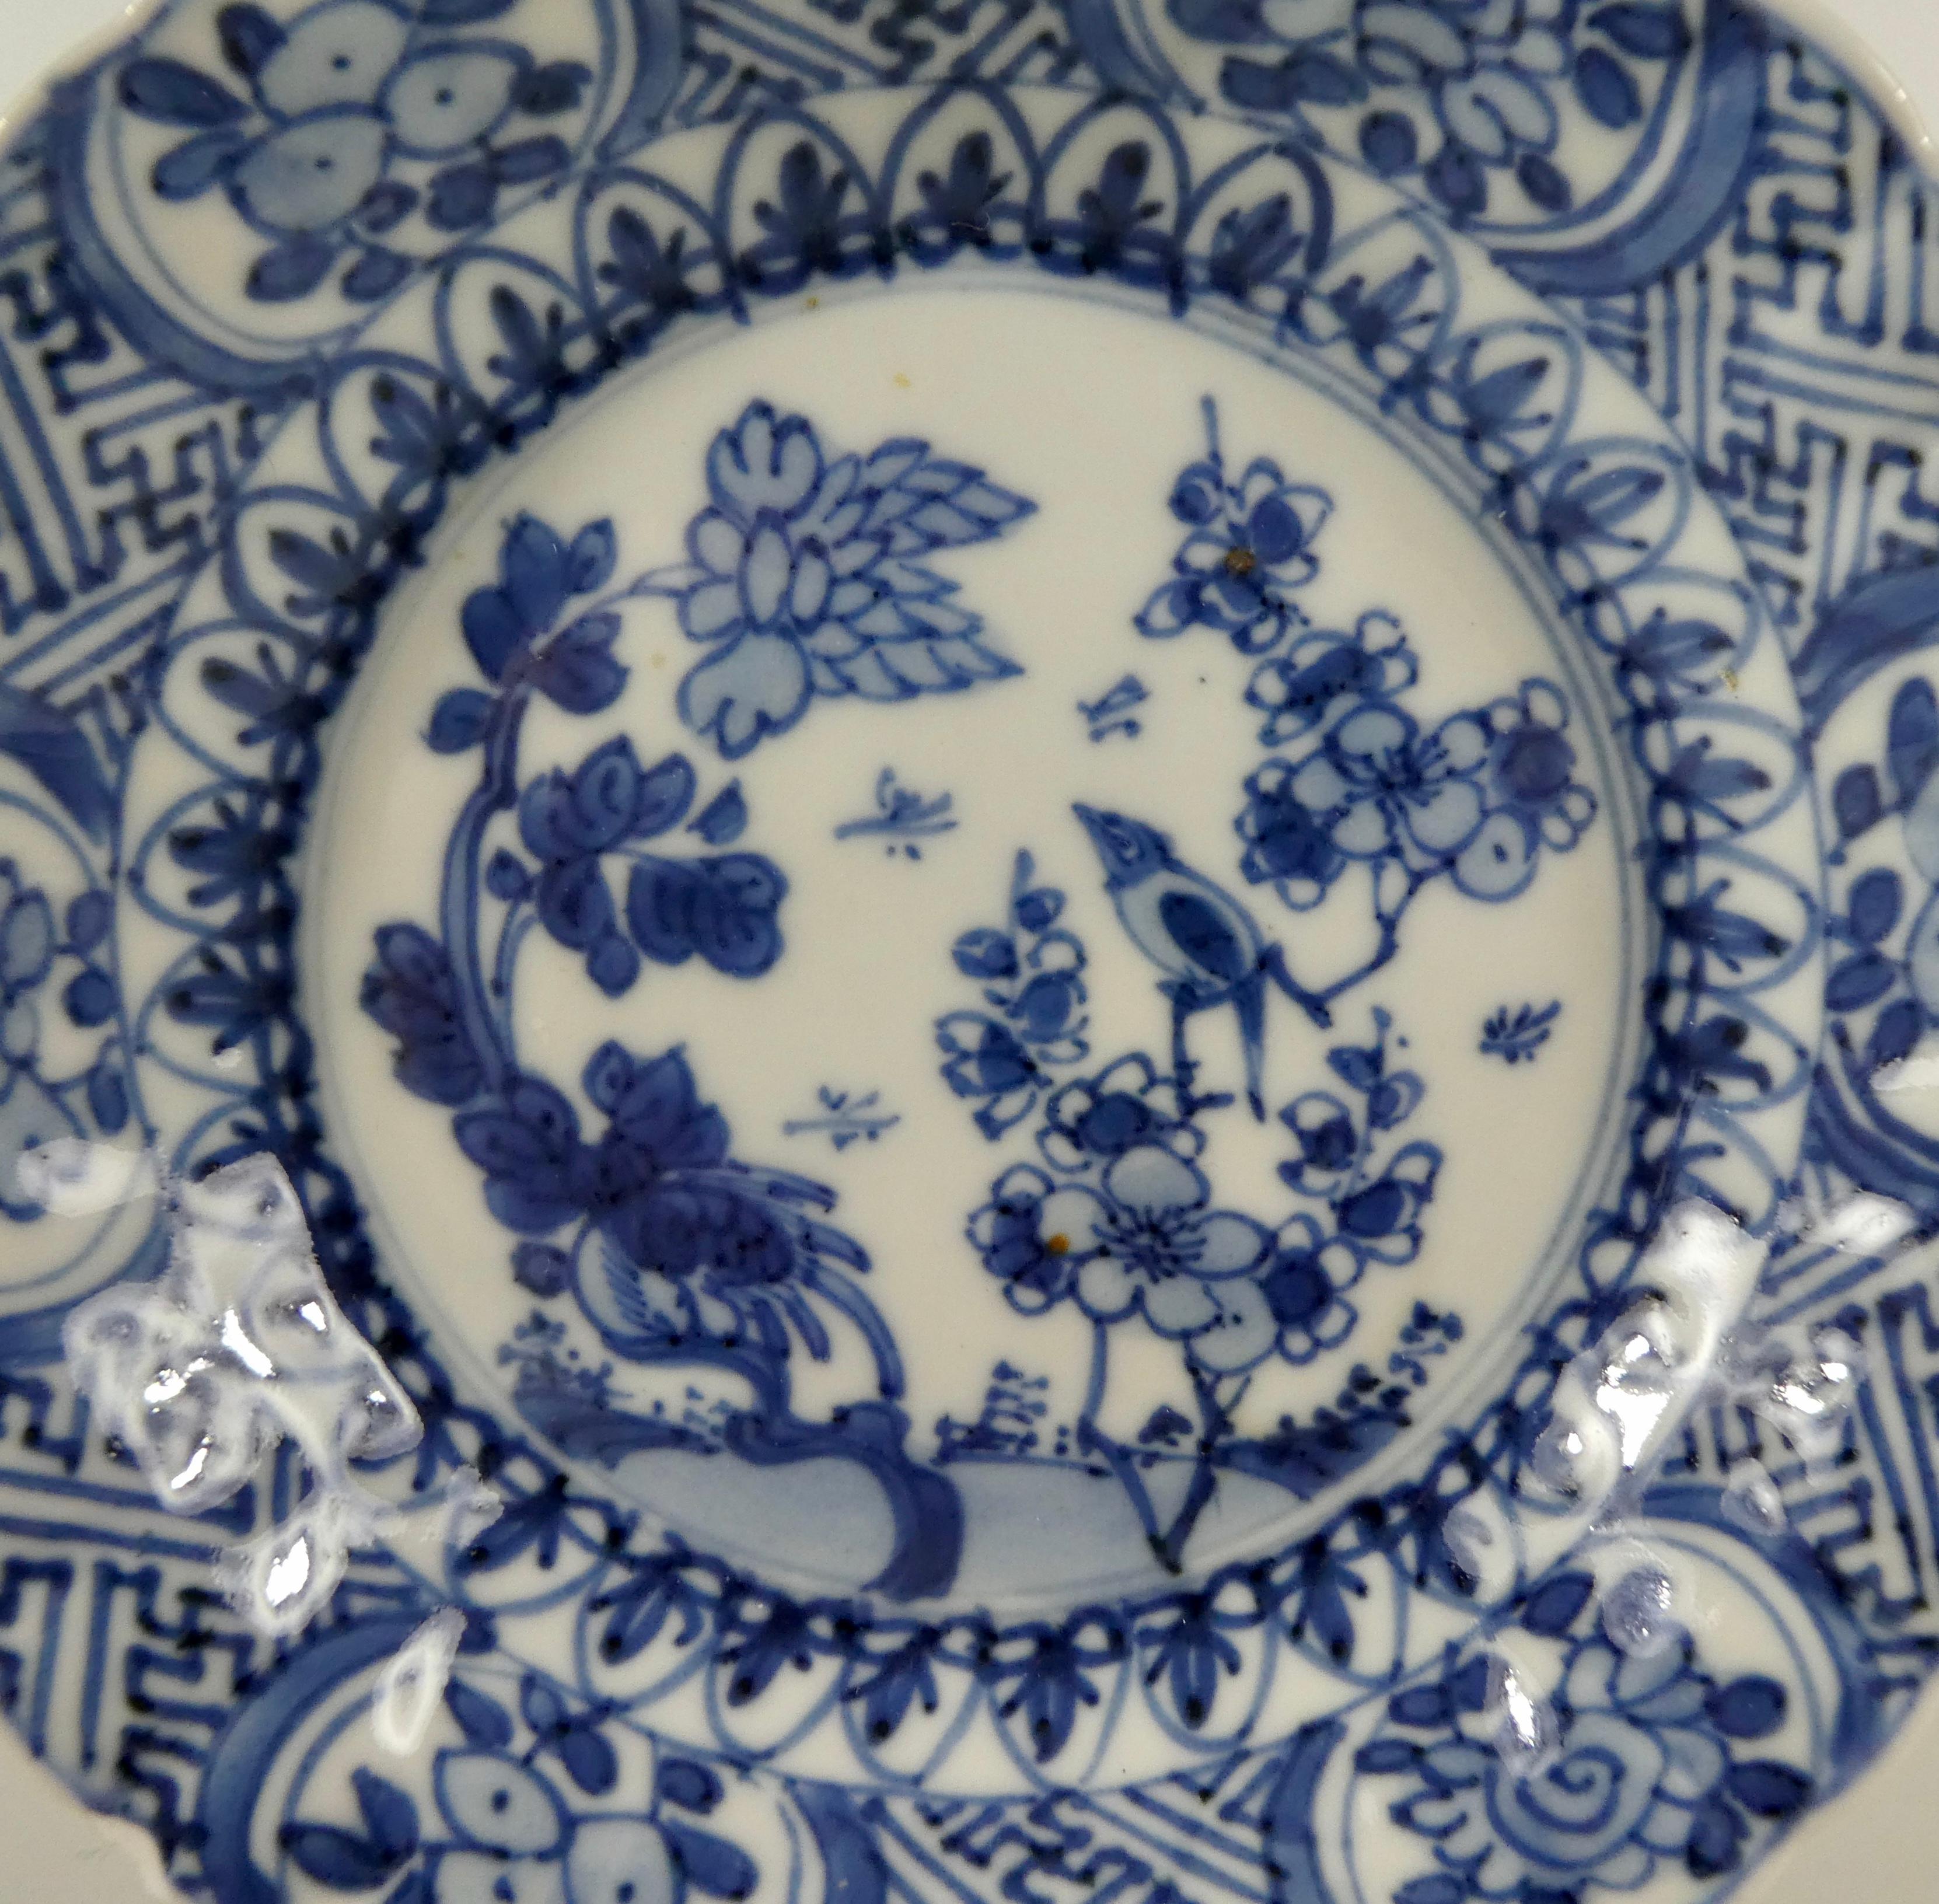 A small Chinese porcelain dish, Kangxi period, 1662-1722. The moulded dish, painted in underglaze blue with a central panel of a bird, perched amongst flowering plants, observing insects within a lappet border. Panels of flowering plants, upon a